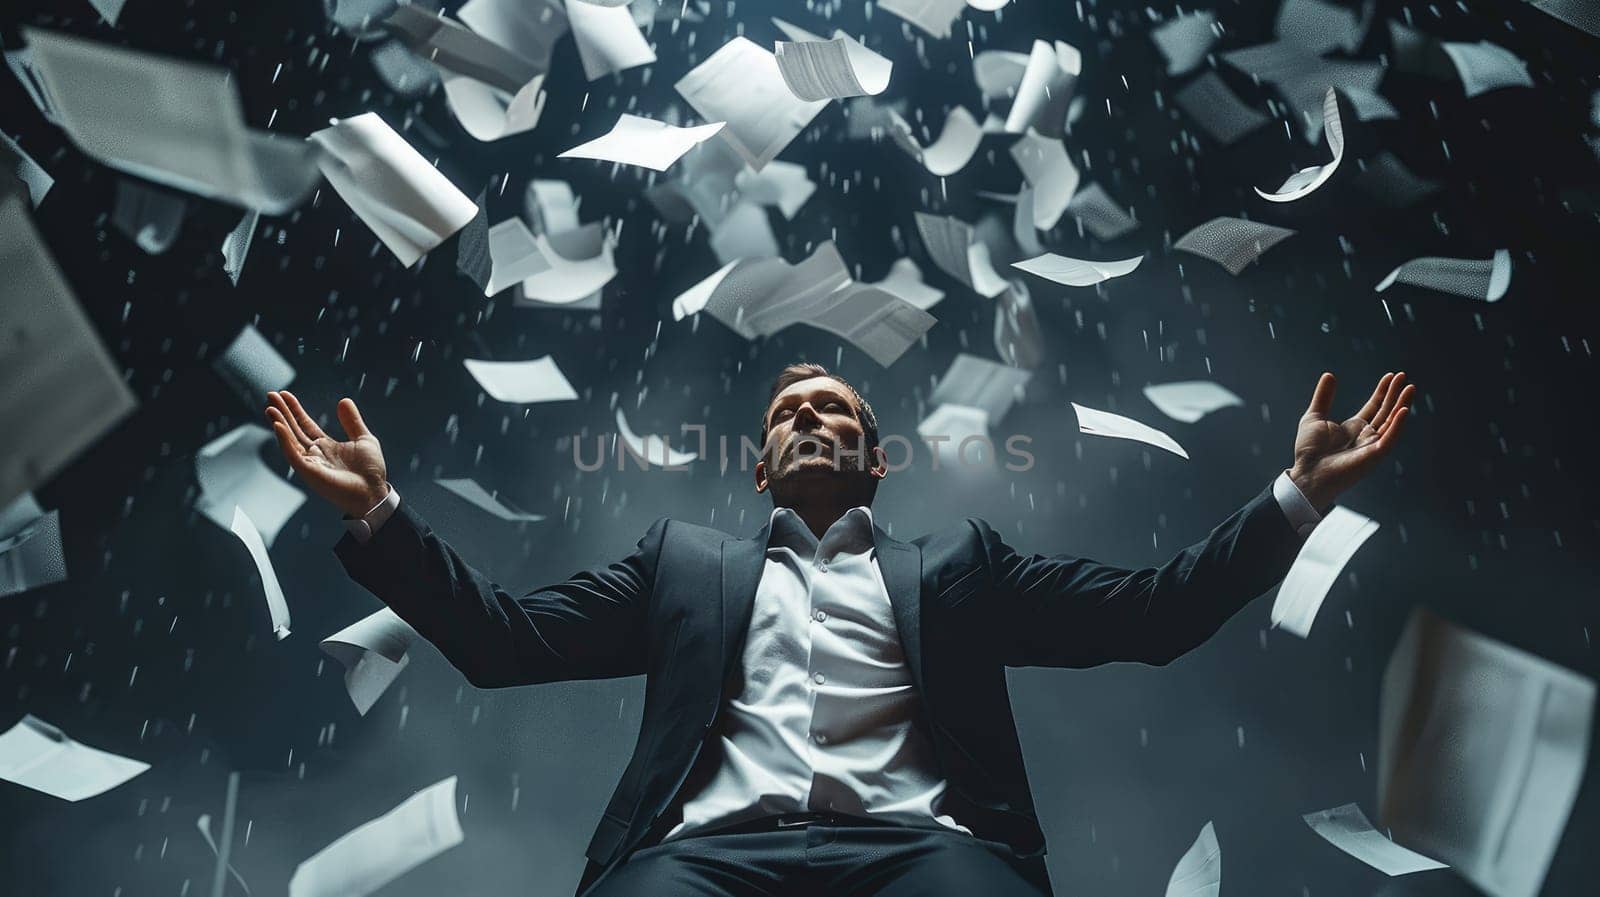 A businessman with pile of papers flying on air, Expressing anxiety or stress.